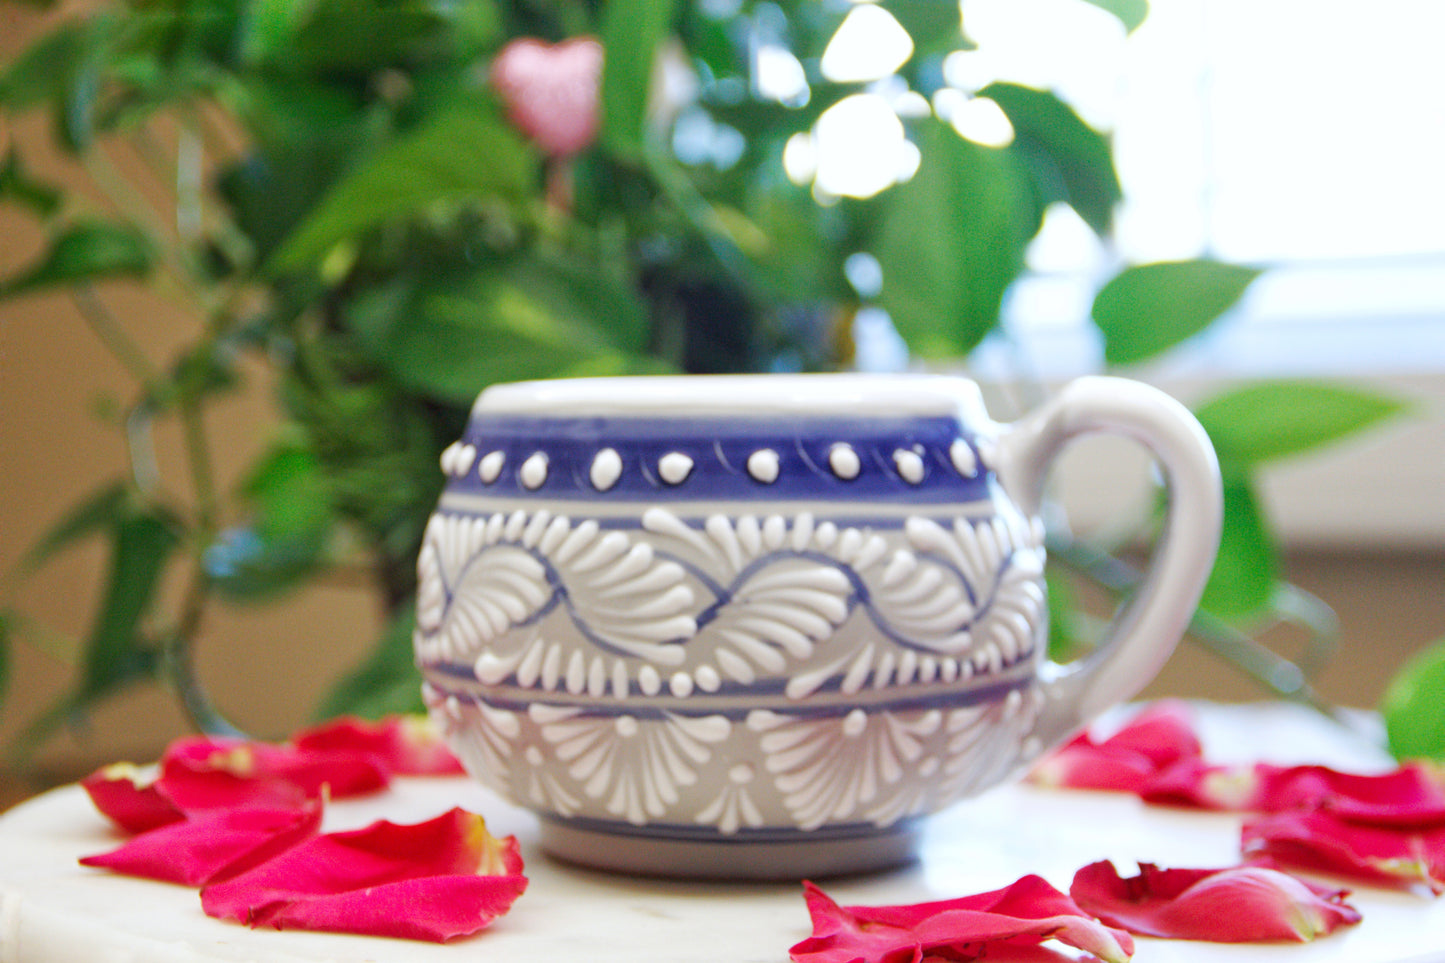 Front view of the artisanal candle. Blue Grey color with white hand painted design. Handcrafted by Artisan in Puebla, Mexico. 100% All Natural Soy Candle. Reuse the talavera as home decor or storage.